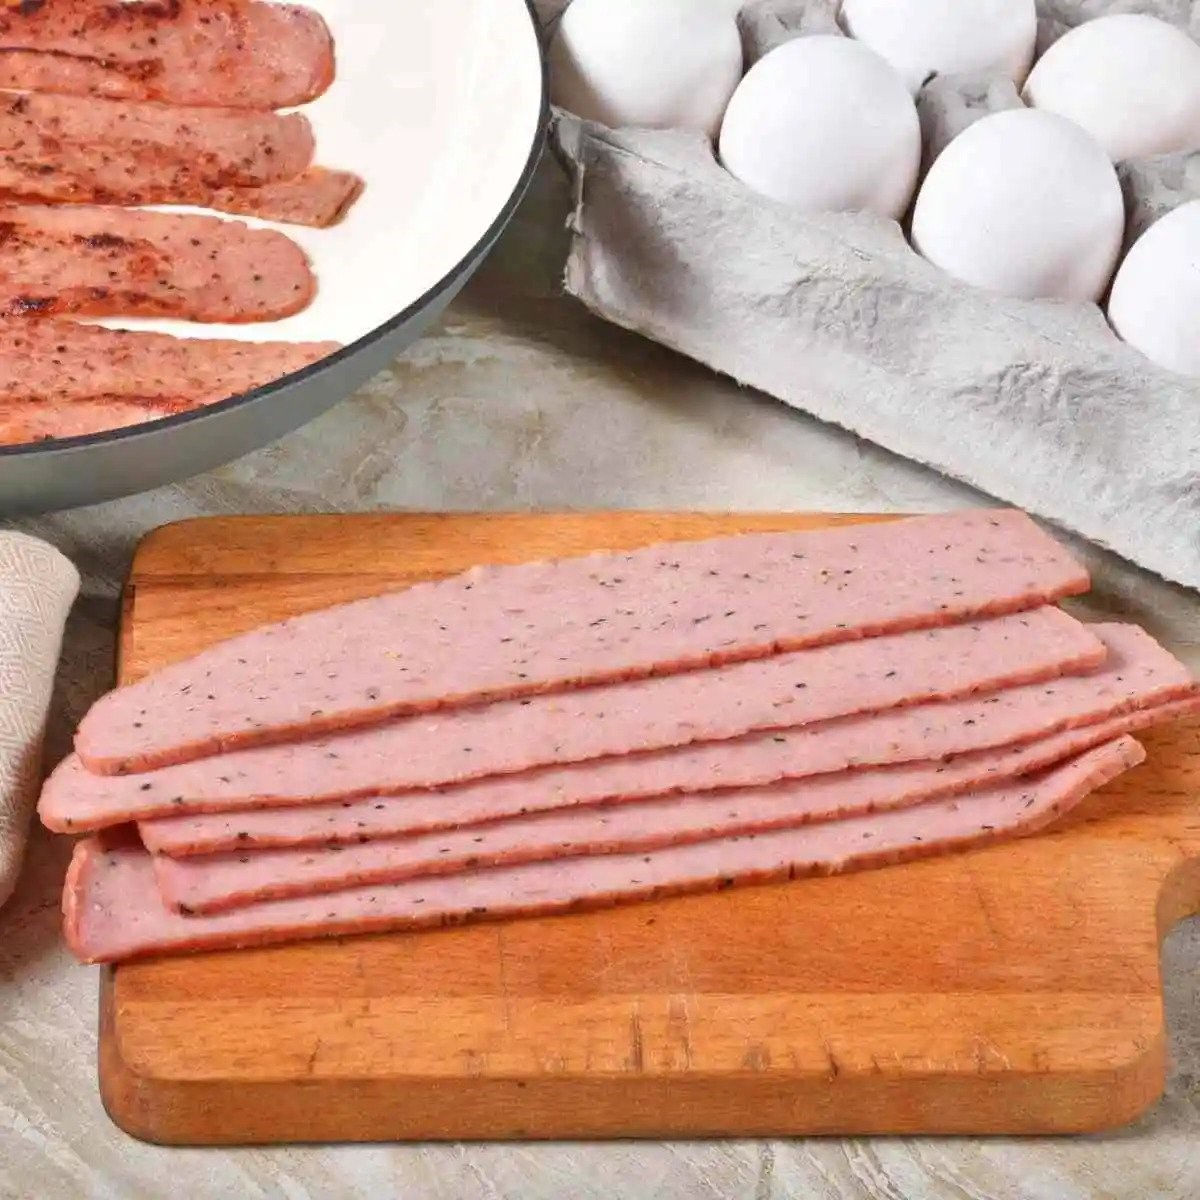 How To Store Turkey Bacon After Opening